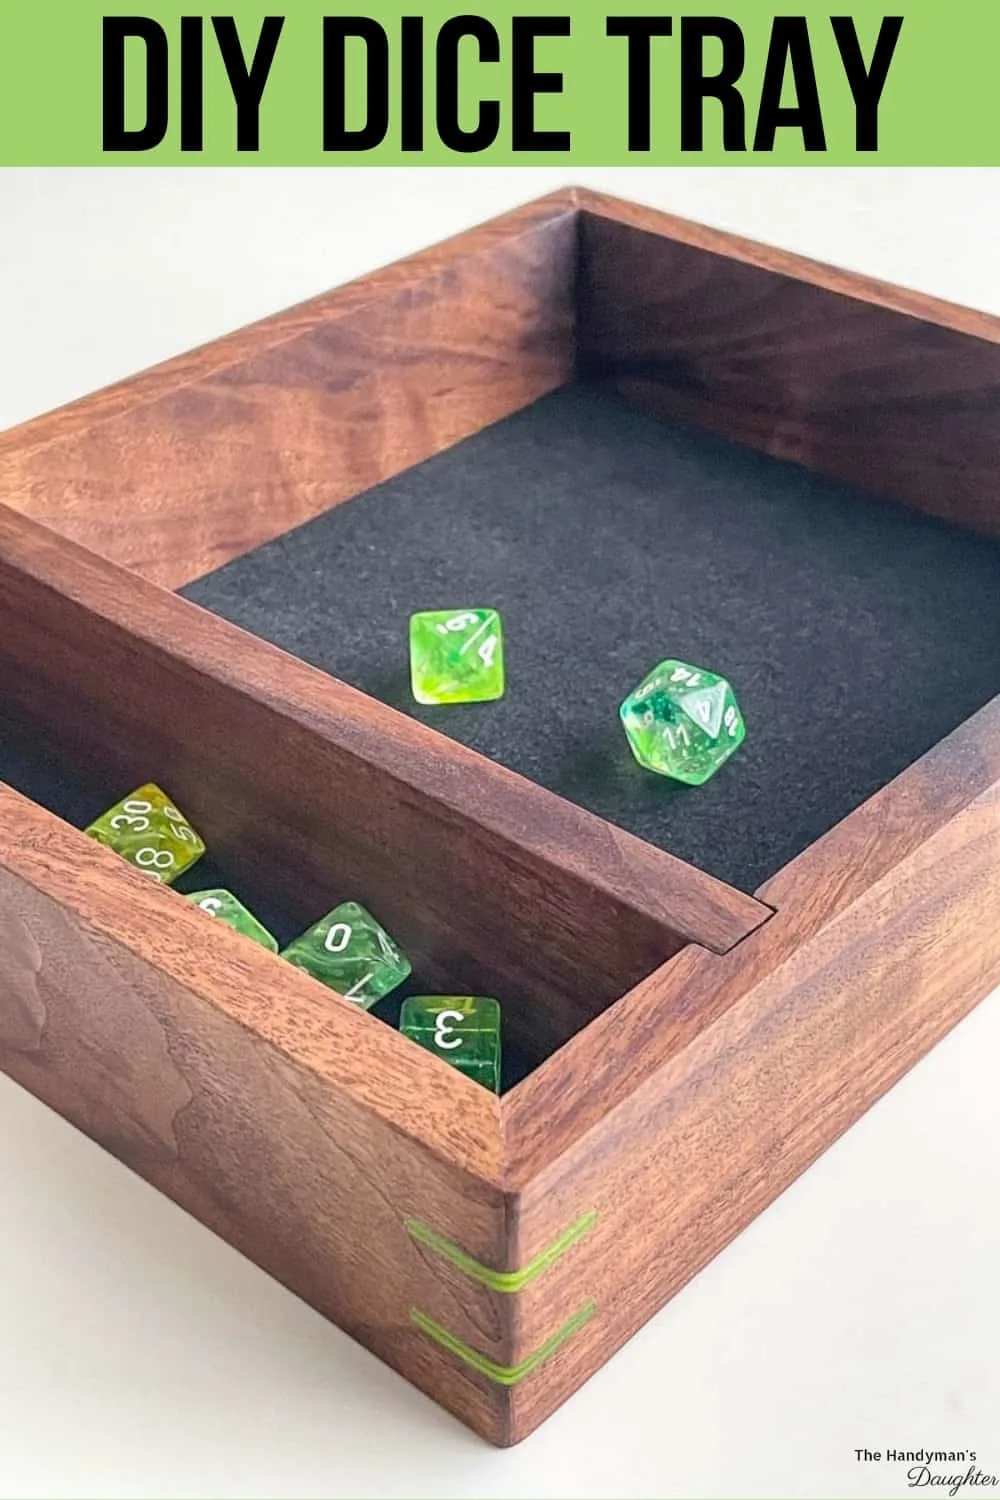 https://www.thehandymansdaughter.com/wp-content/uploads/2020/12/DIY-Dice-Tray-Pin-2.jpg.webp